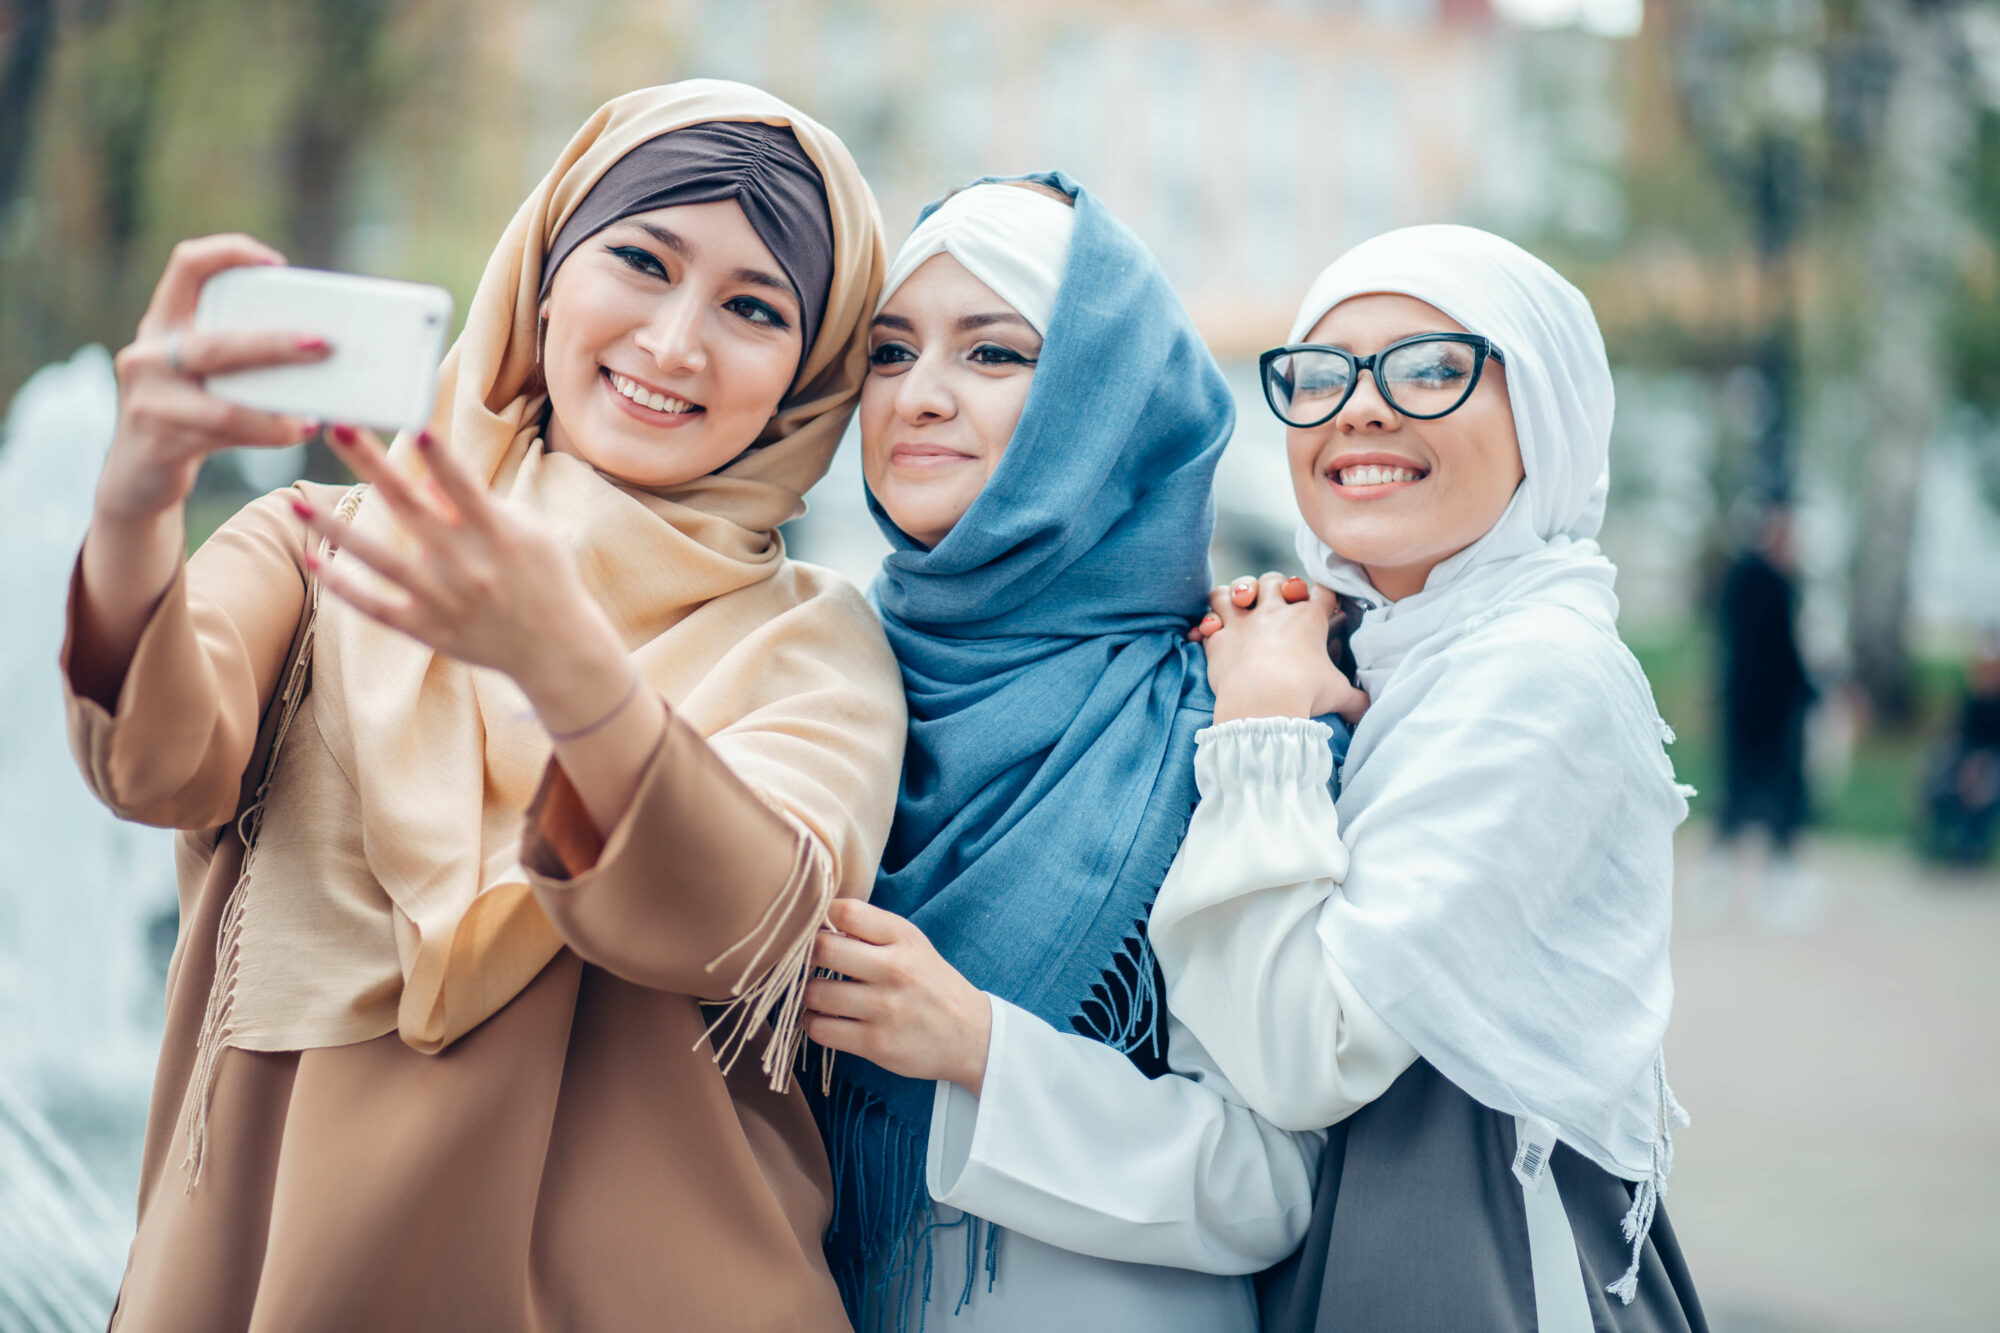 three middle eastern young women taking a picture